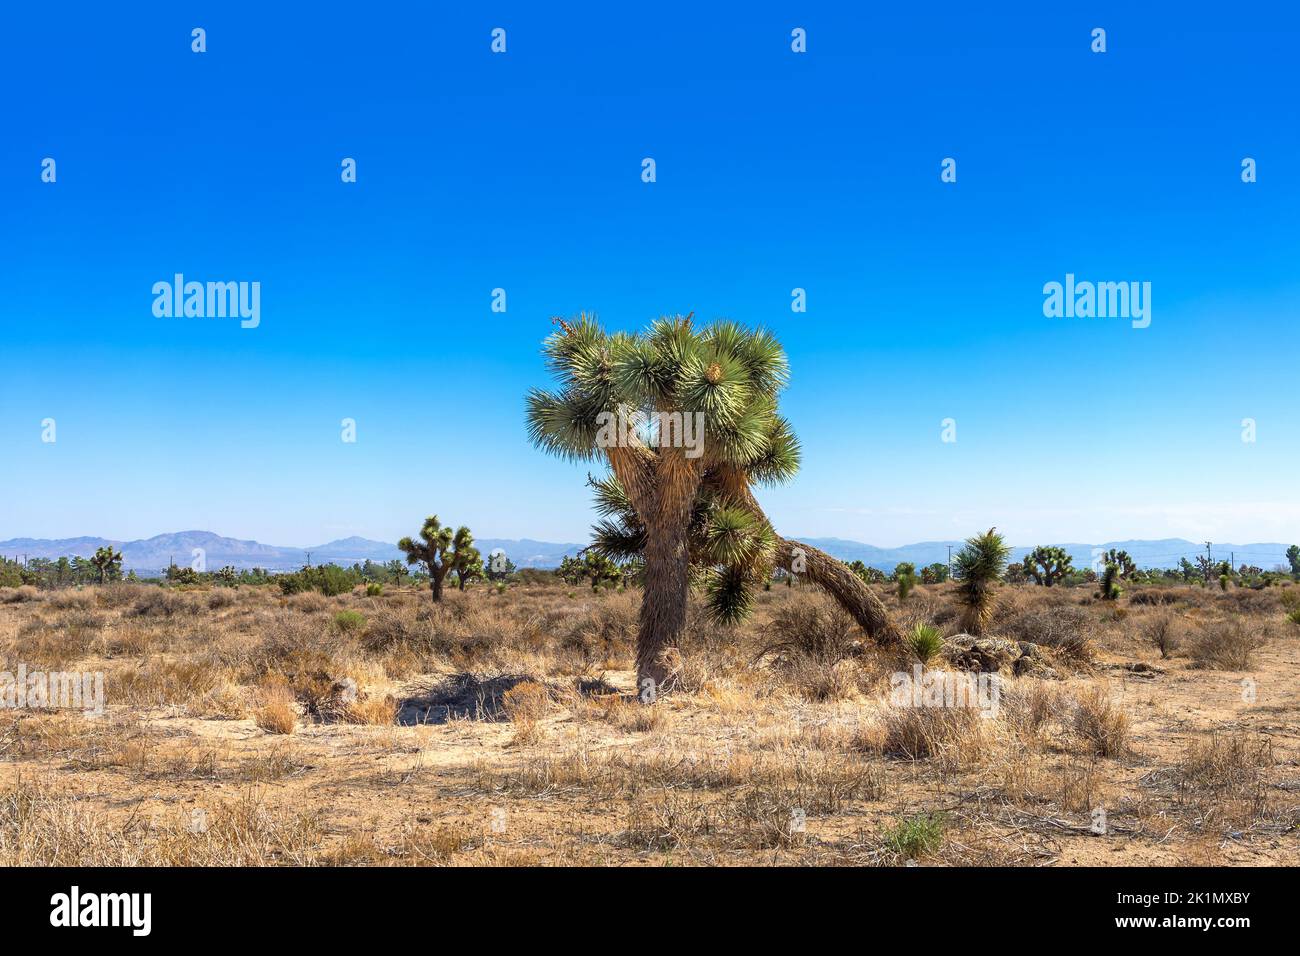 A Joshua Tree in a dry Mojave Desert landscape with clear blue sky Stock Photo